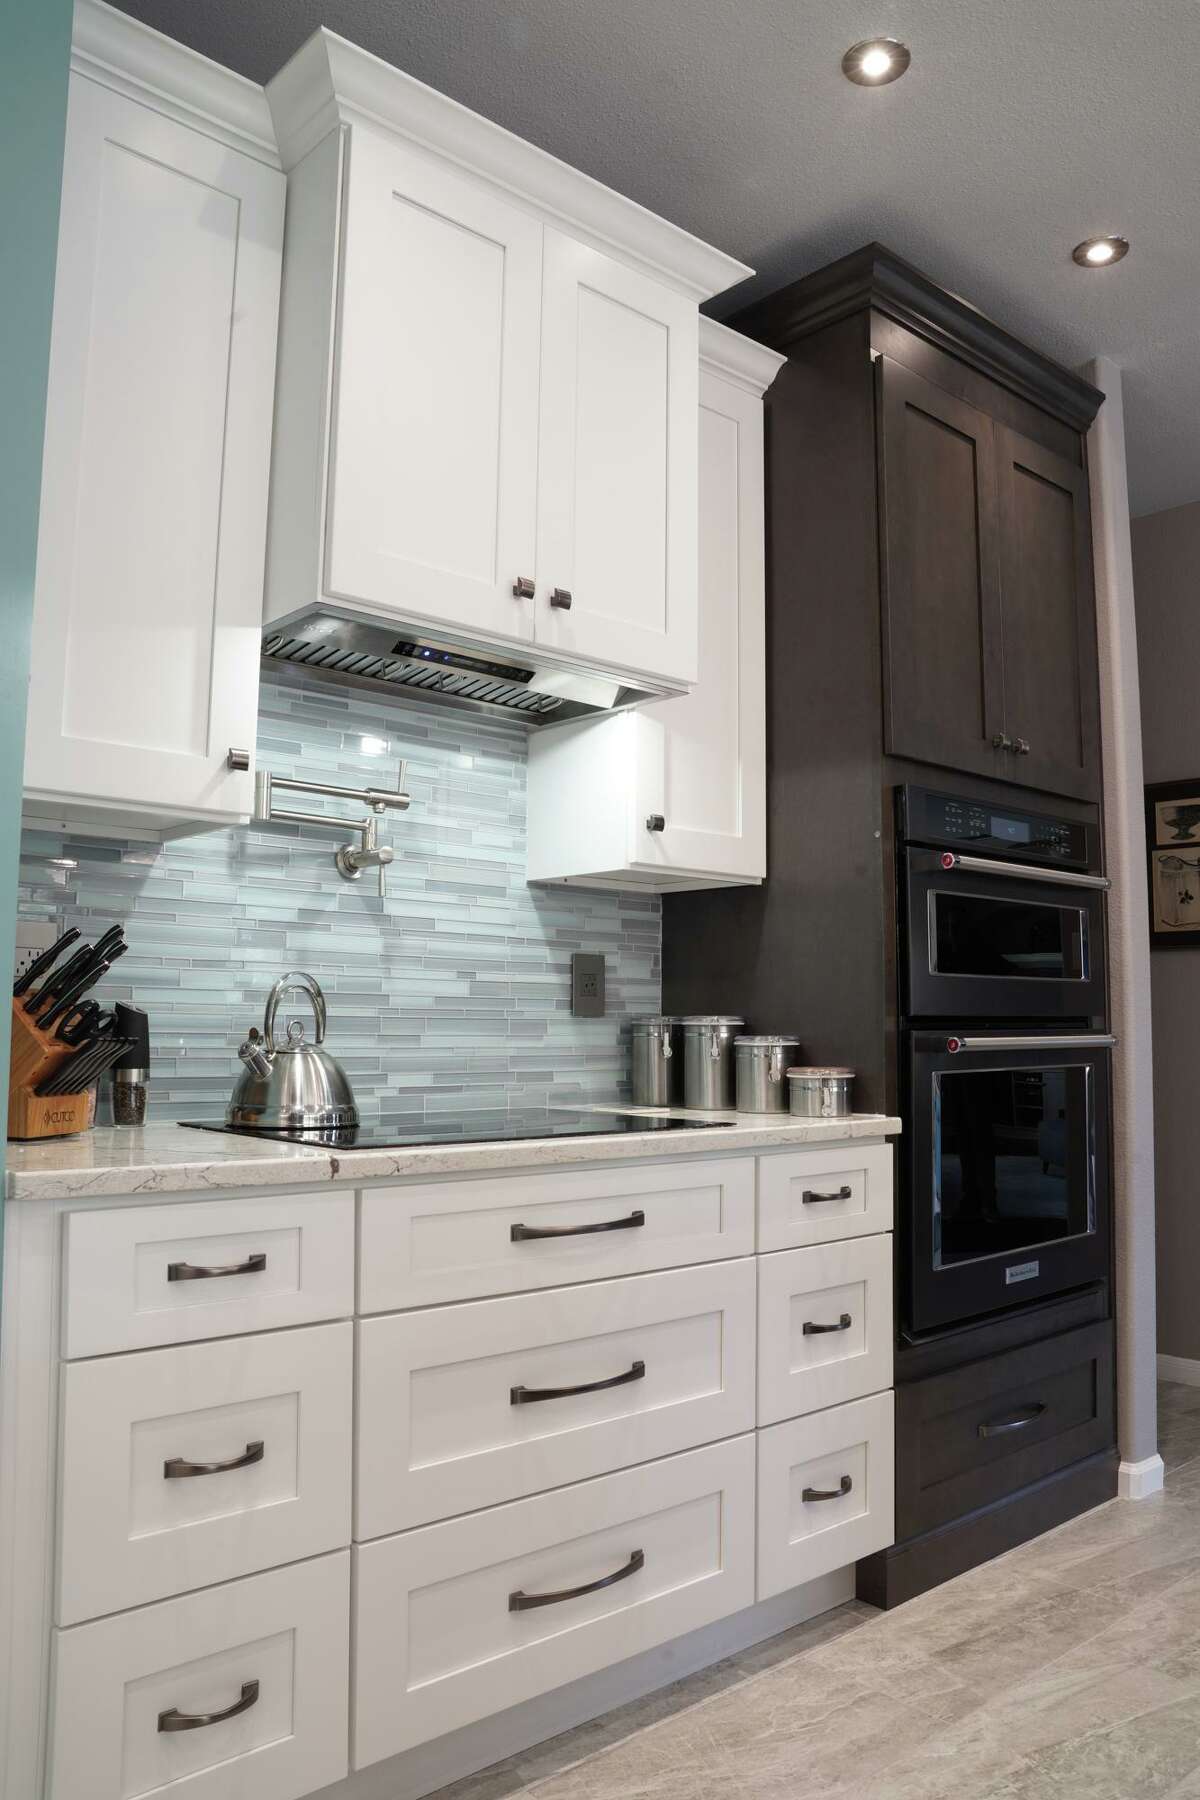 The kitchen has a silver-and-blue glass tile backsplash and a pot-filler above the stove.